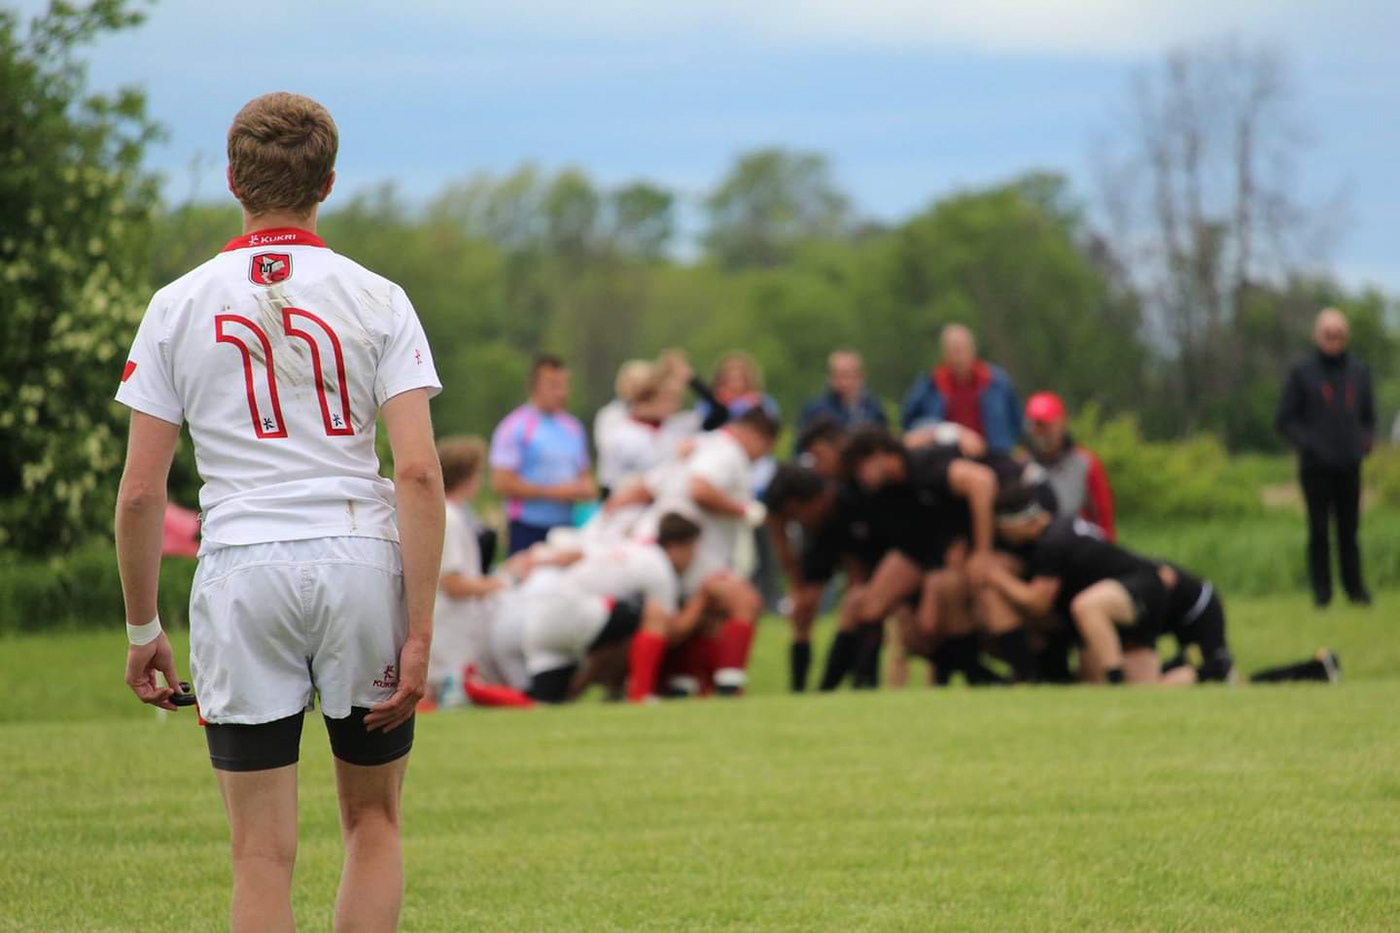 Ontario Photography  Rugby rugby Canada sports photography